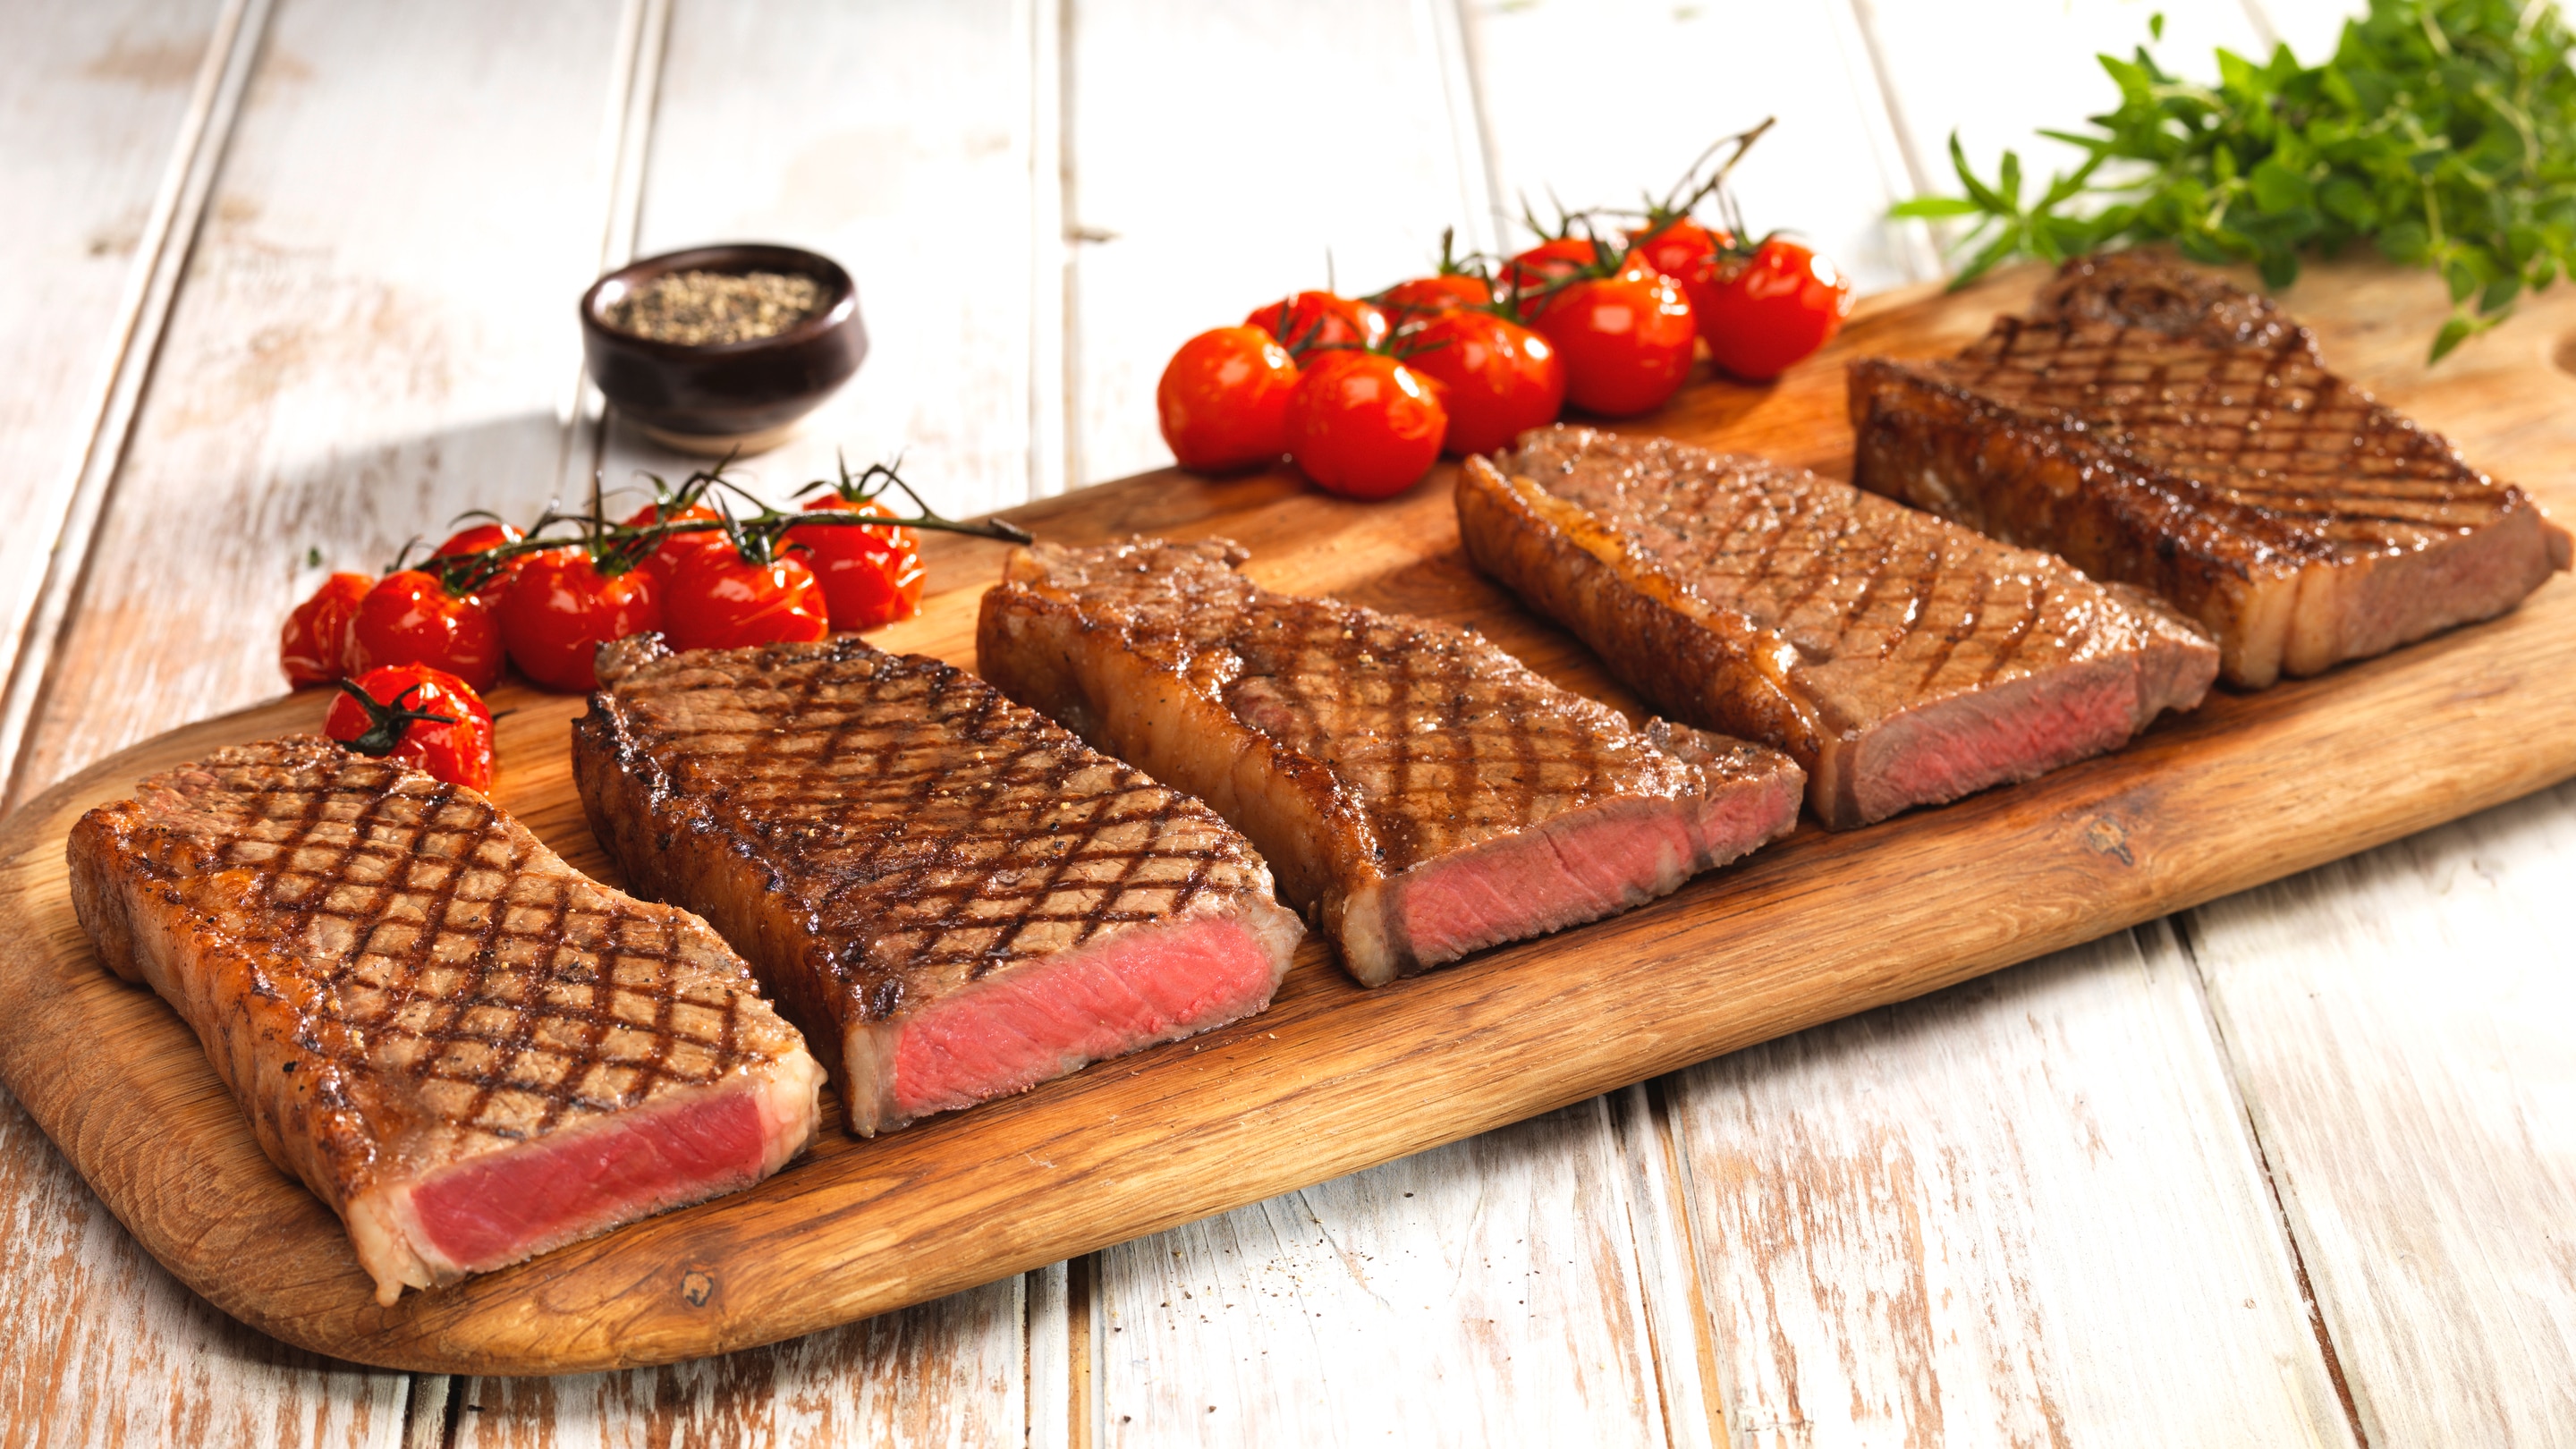 Grilled steak pieces placed on a wooden surface with bunch of cherry tomatoes and green leafy salad.  